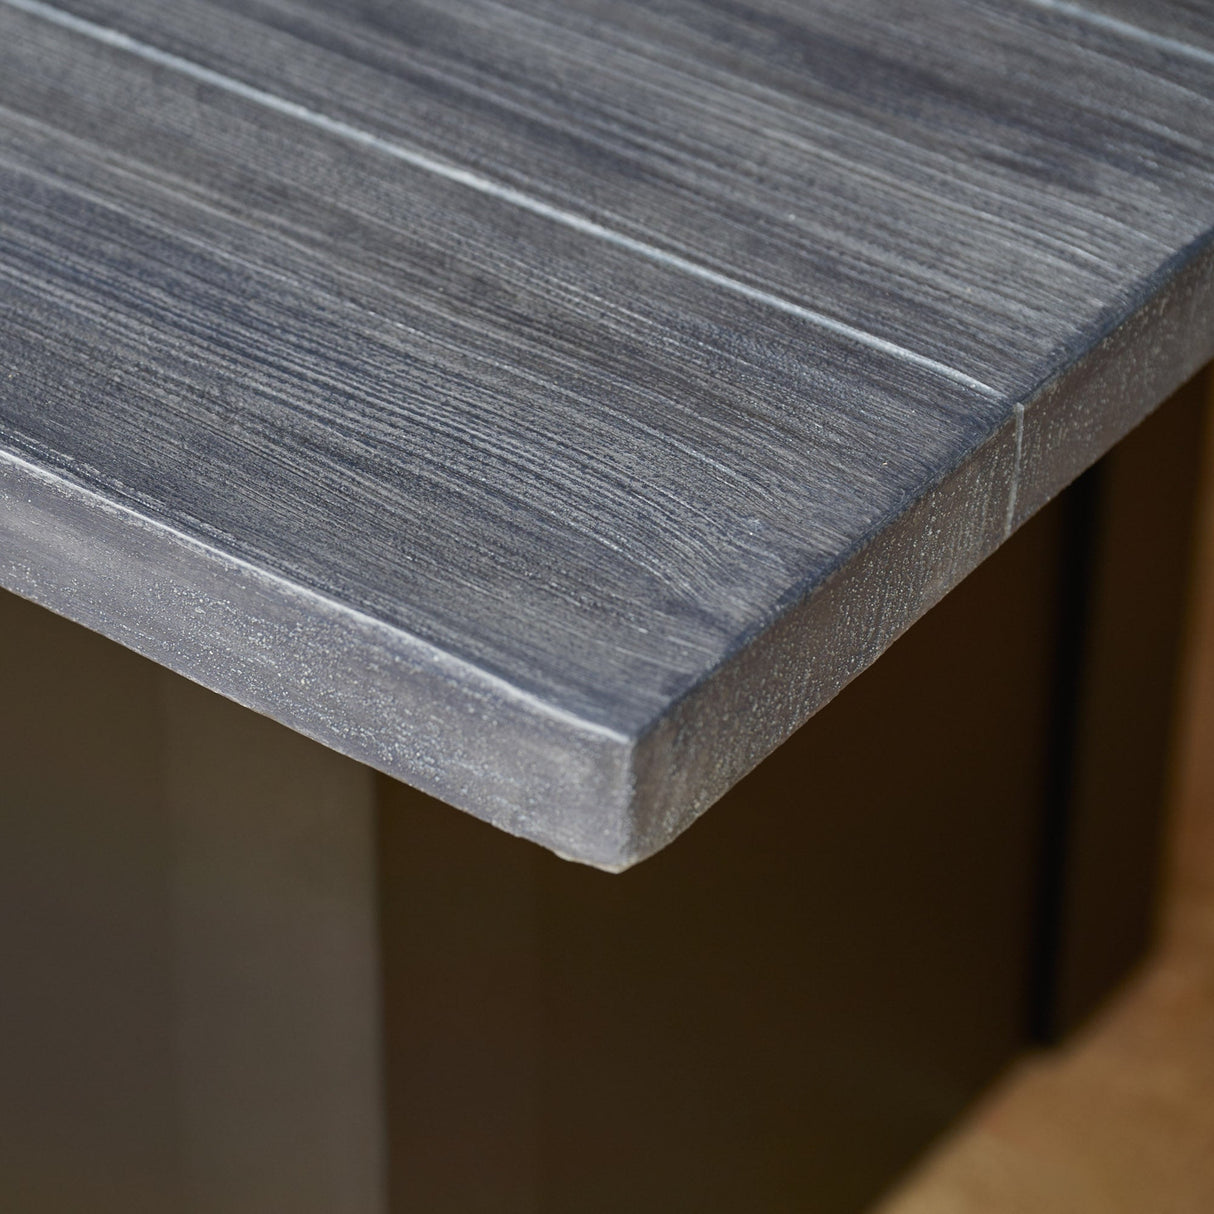 A view of the detail found on the top of a Havenwood Linear Gas Fire Pit Table with a Carbon Grey top and Luverne Black base